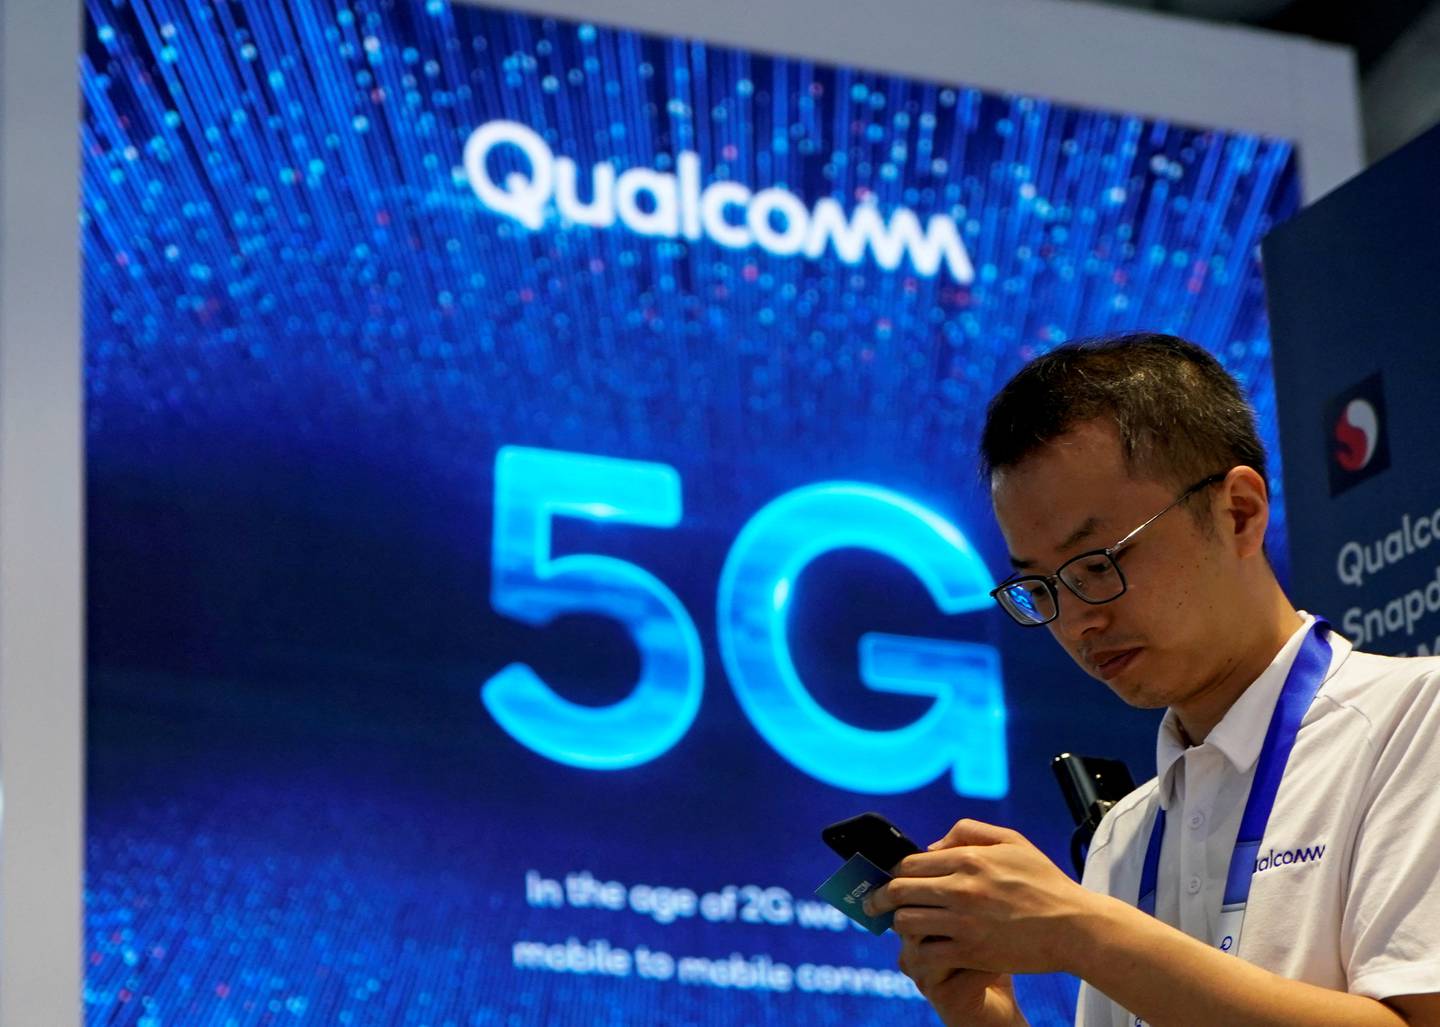 Signs of Qualcomm and 5G at Mobile World Congress in Shanghai. Reuters